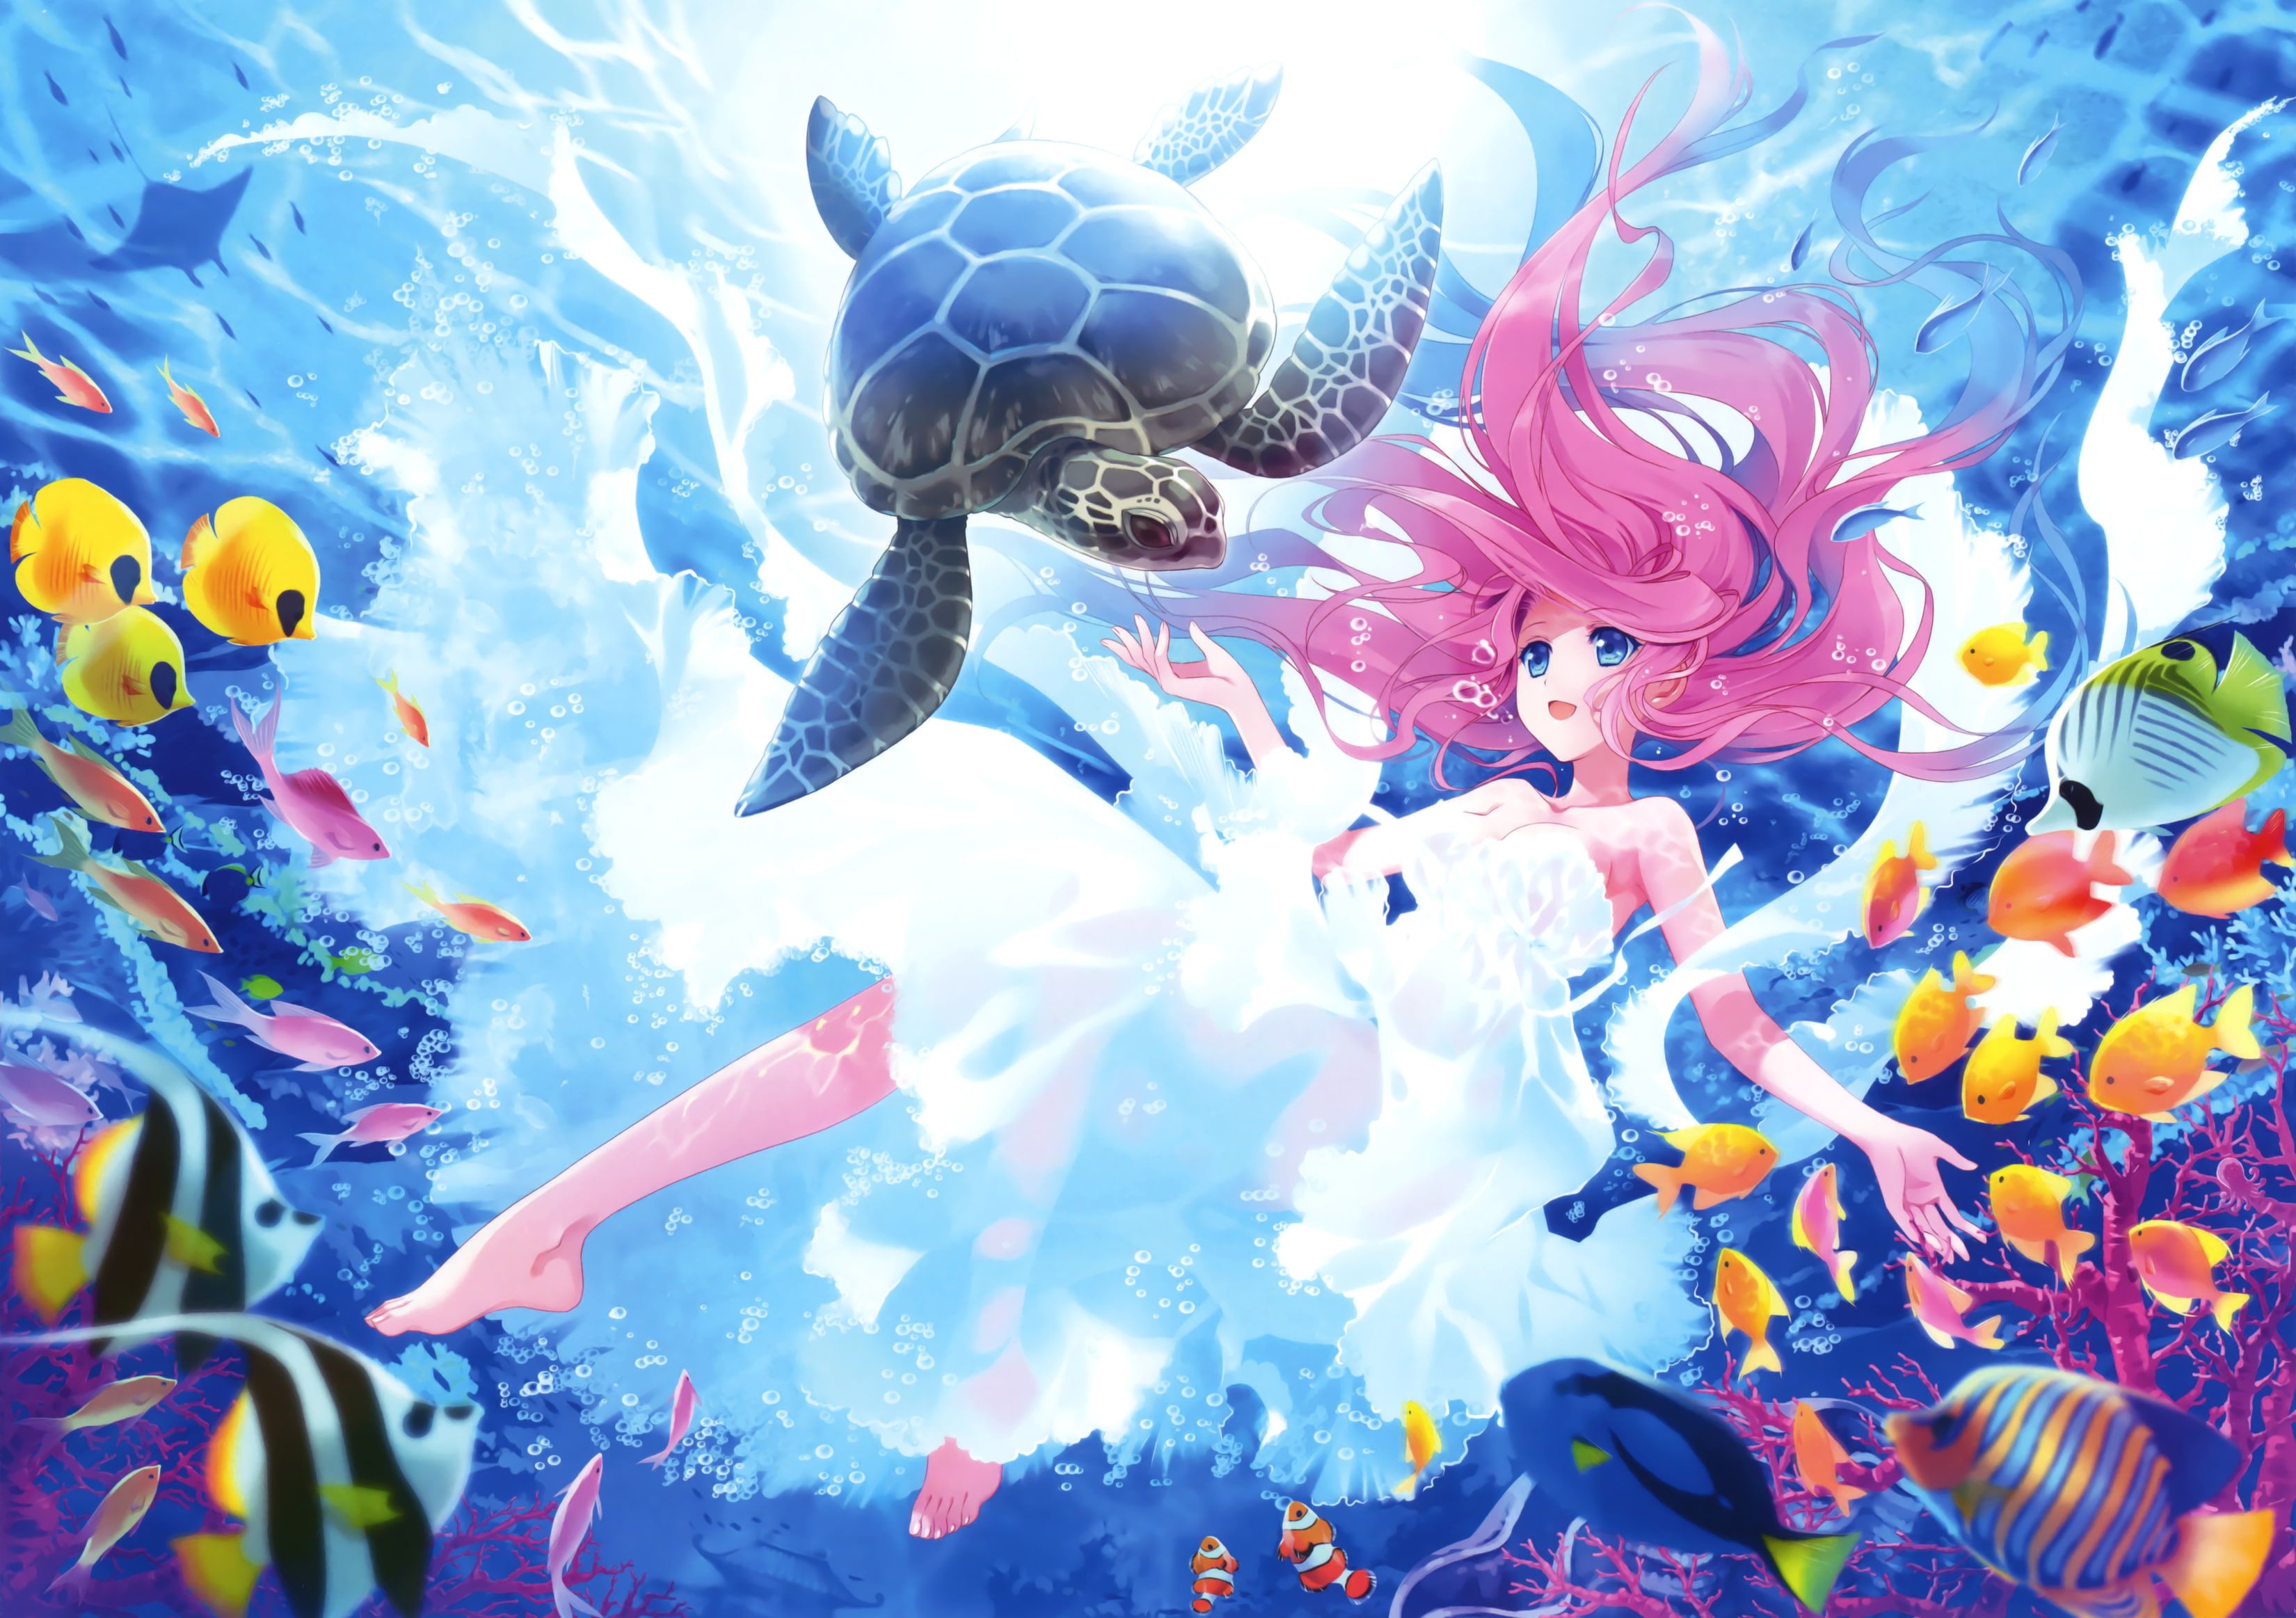 A girl with pink hair is swimming in the ocean - Turtle, underwater